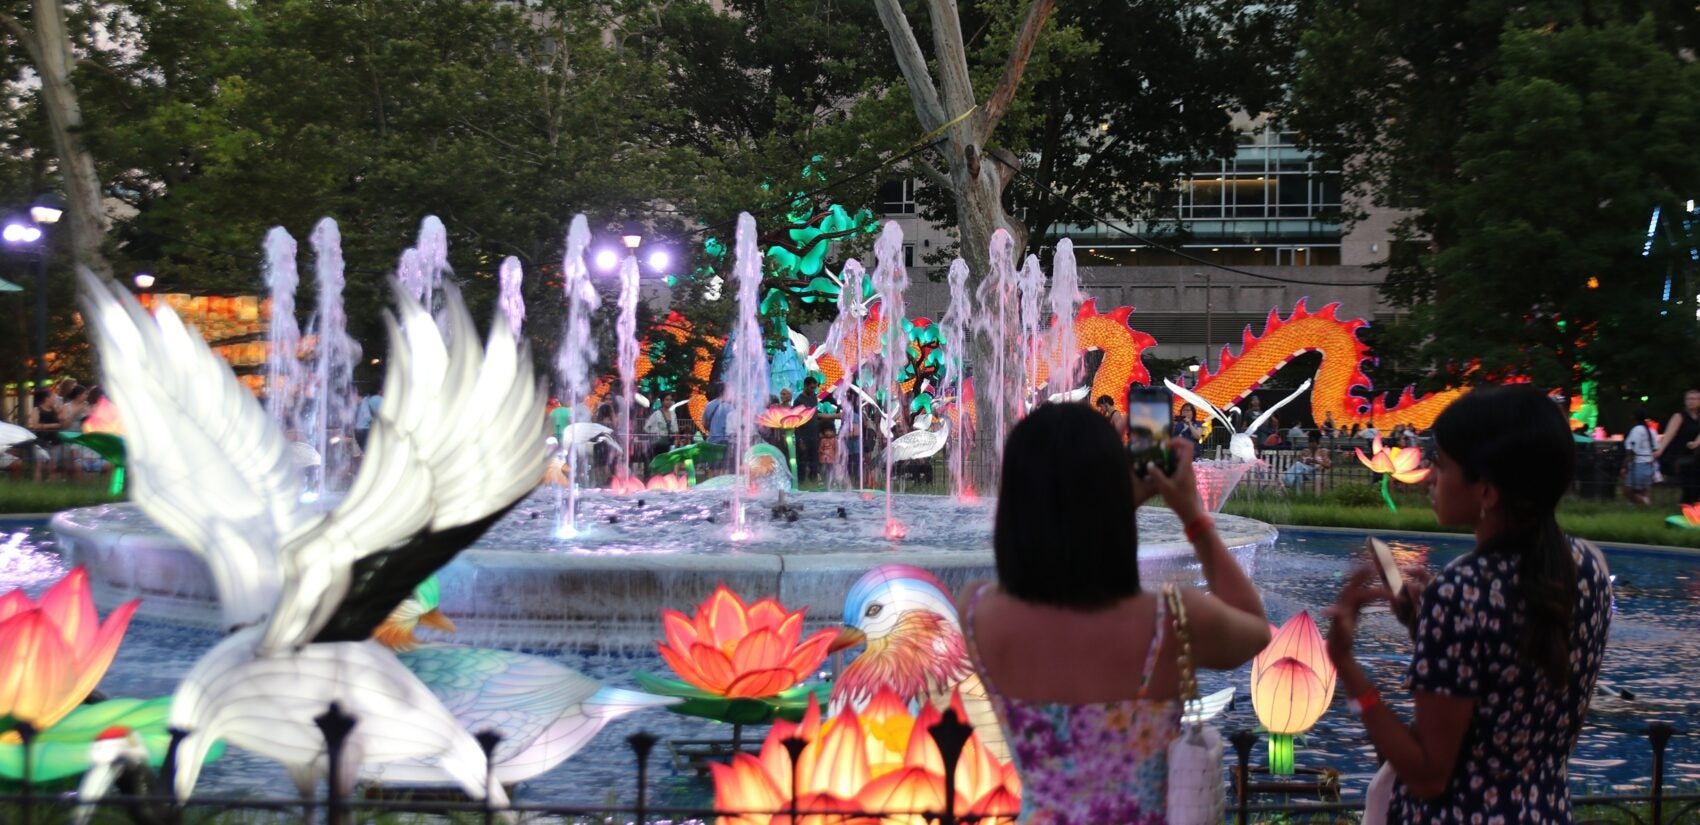 Plenty of photo ops will be had at this year's Chinese Lantern Festival at Franklin Square. (Cory Sharber/WHYY)